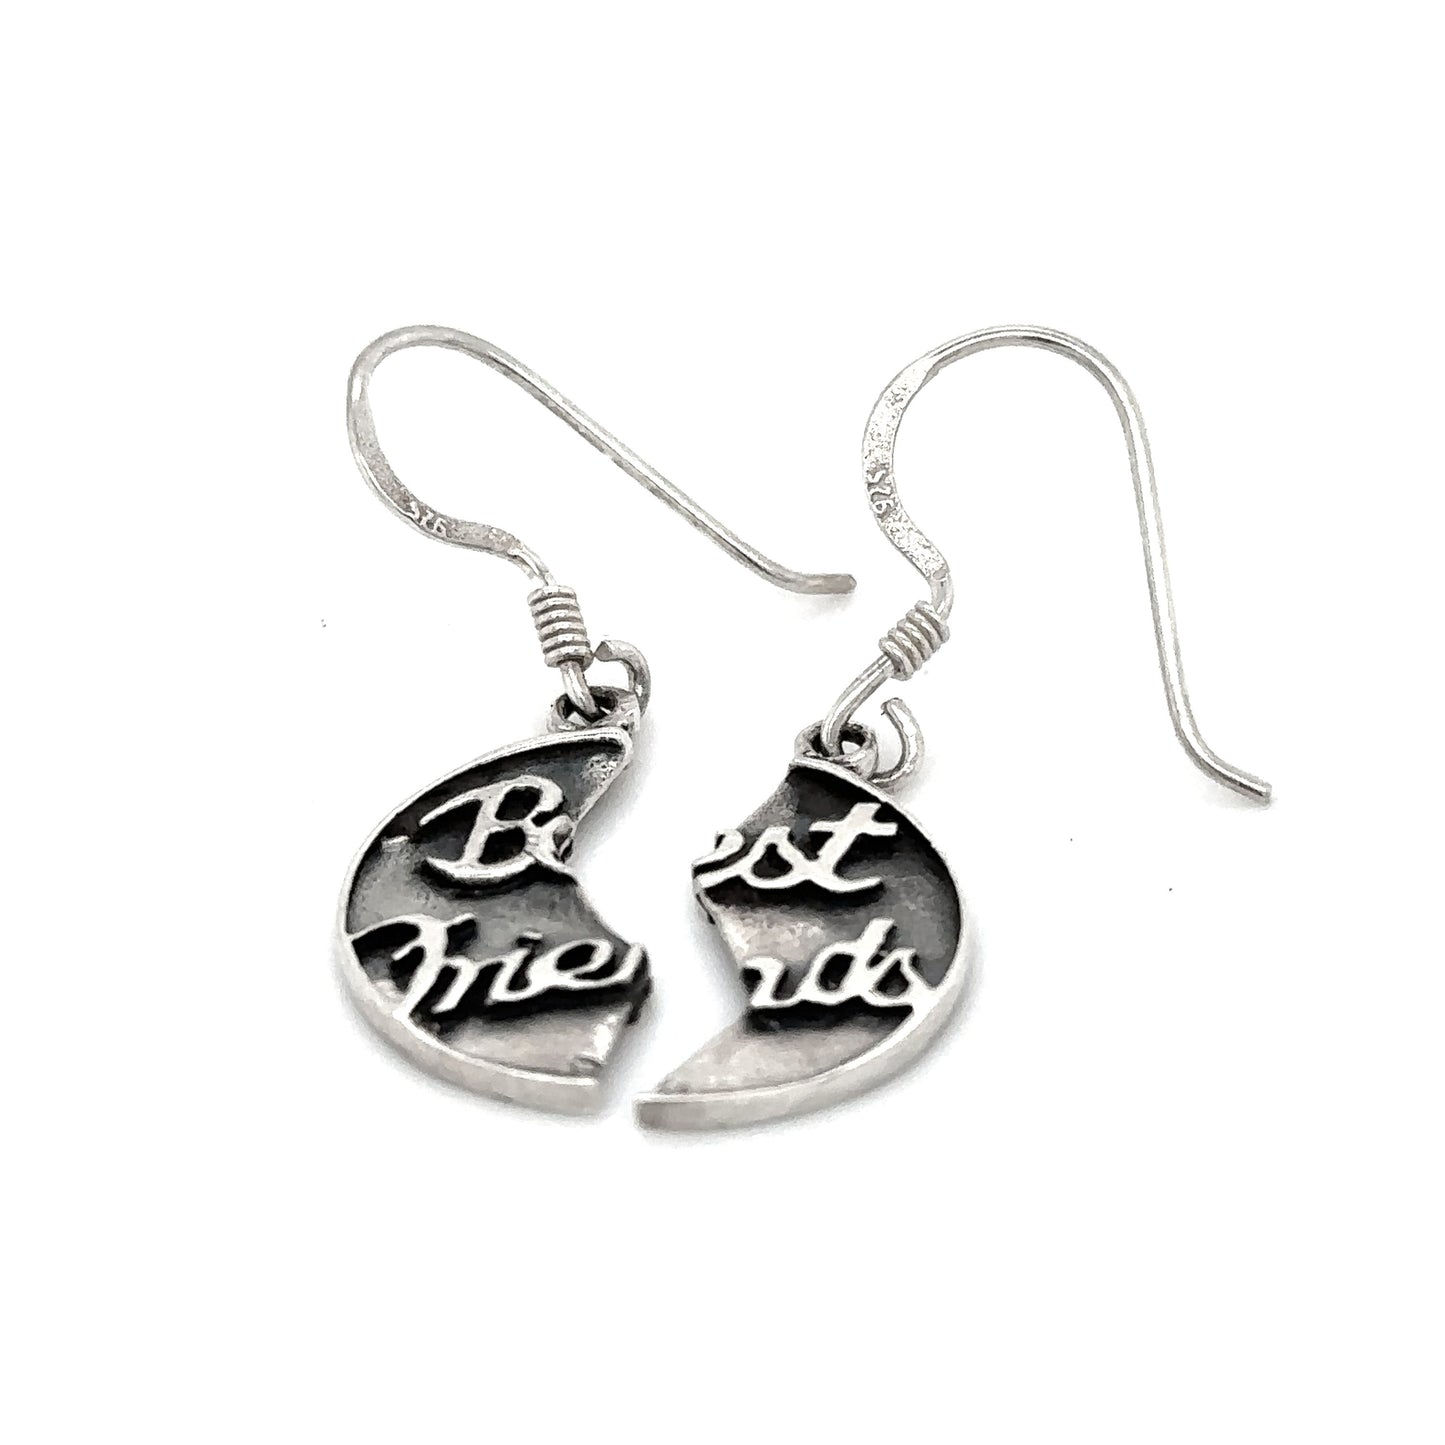 Share these Reversible "Best Friend" Earrings, engraved with the words 'best friends', from Super Silver.